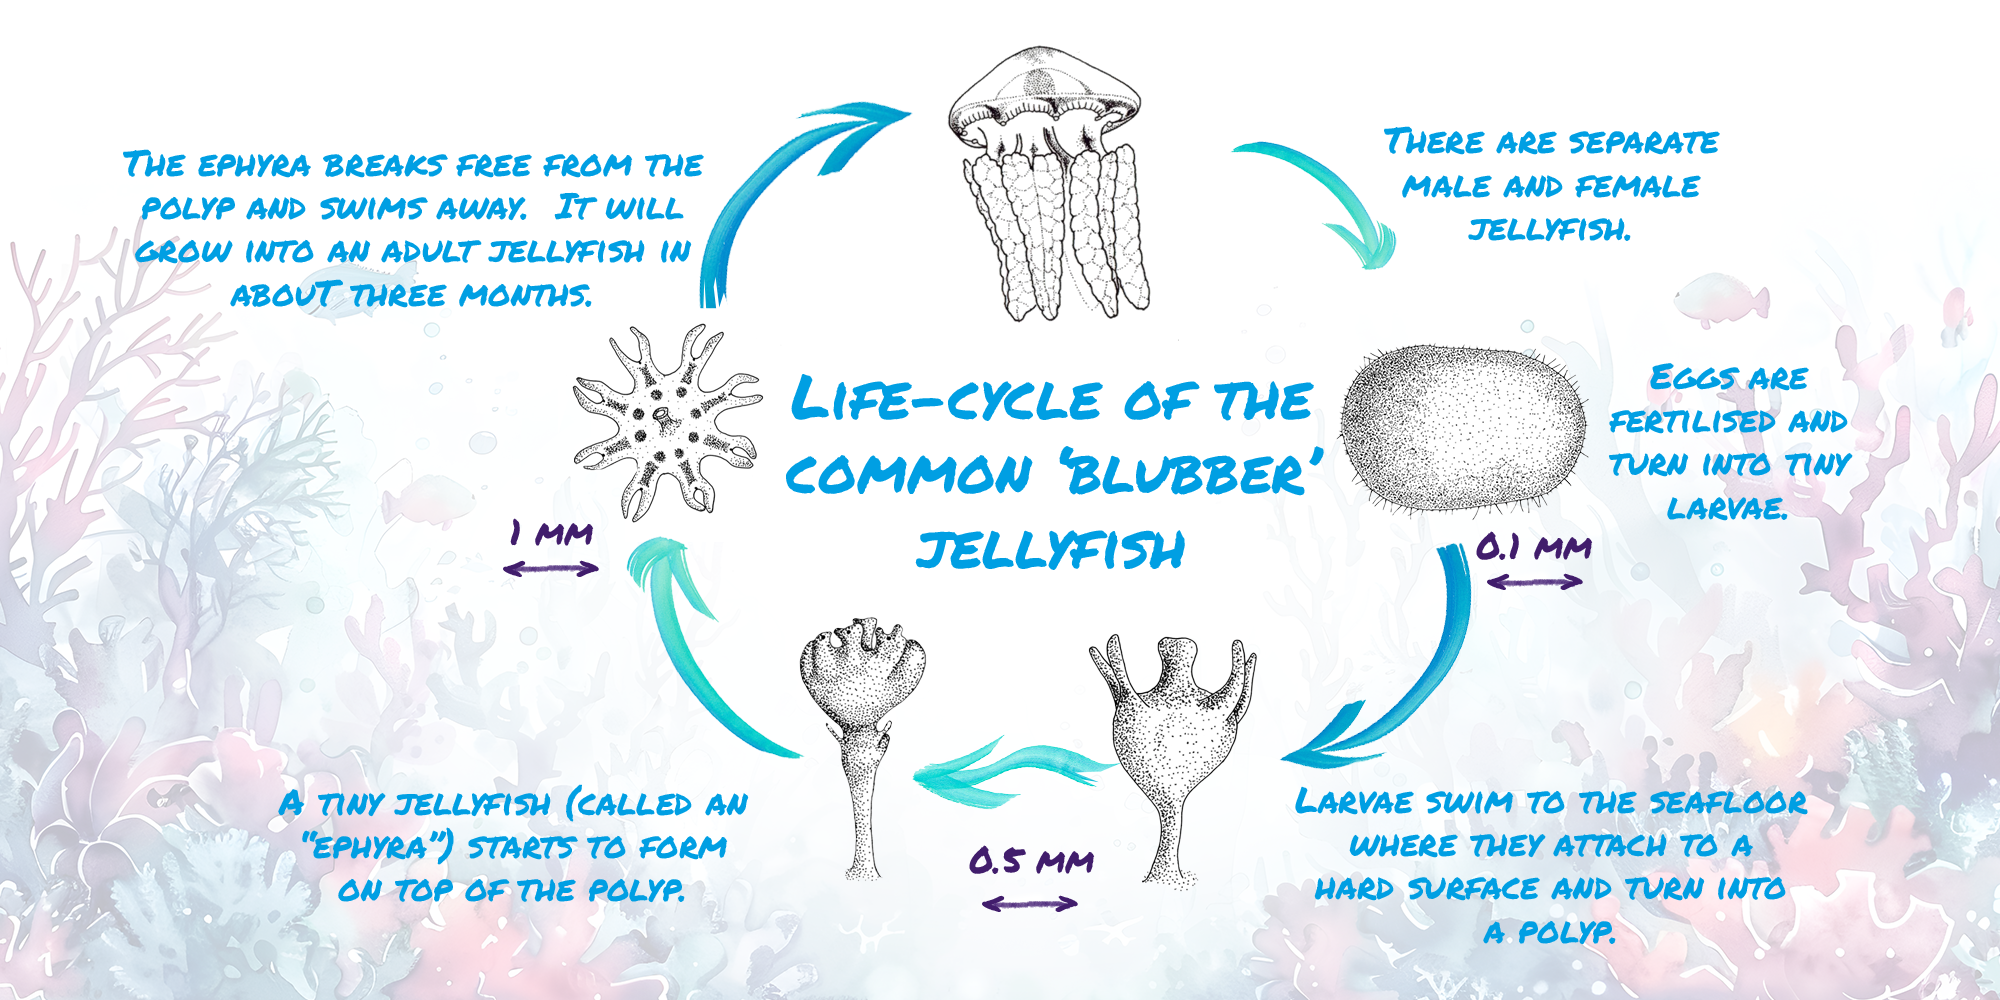 Blubber jellyfish lifecycle